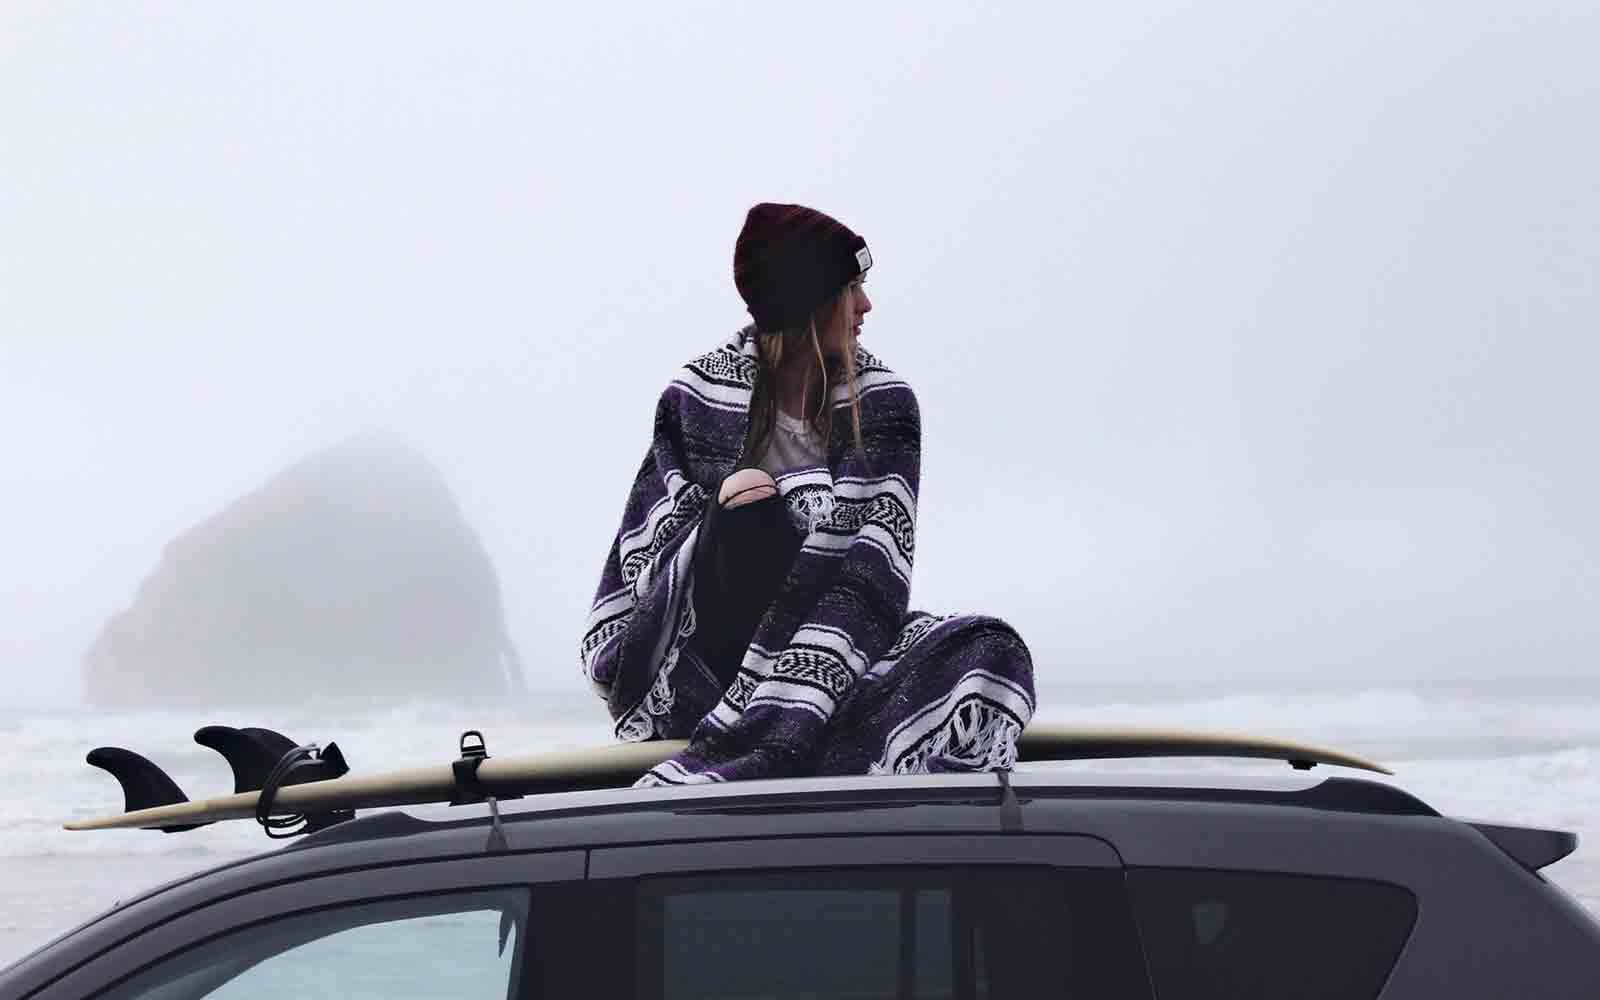 Woman with surfboard sitting on top of car